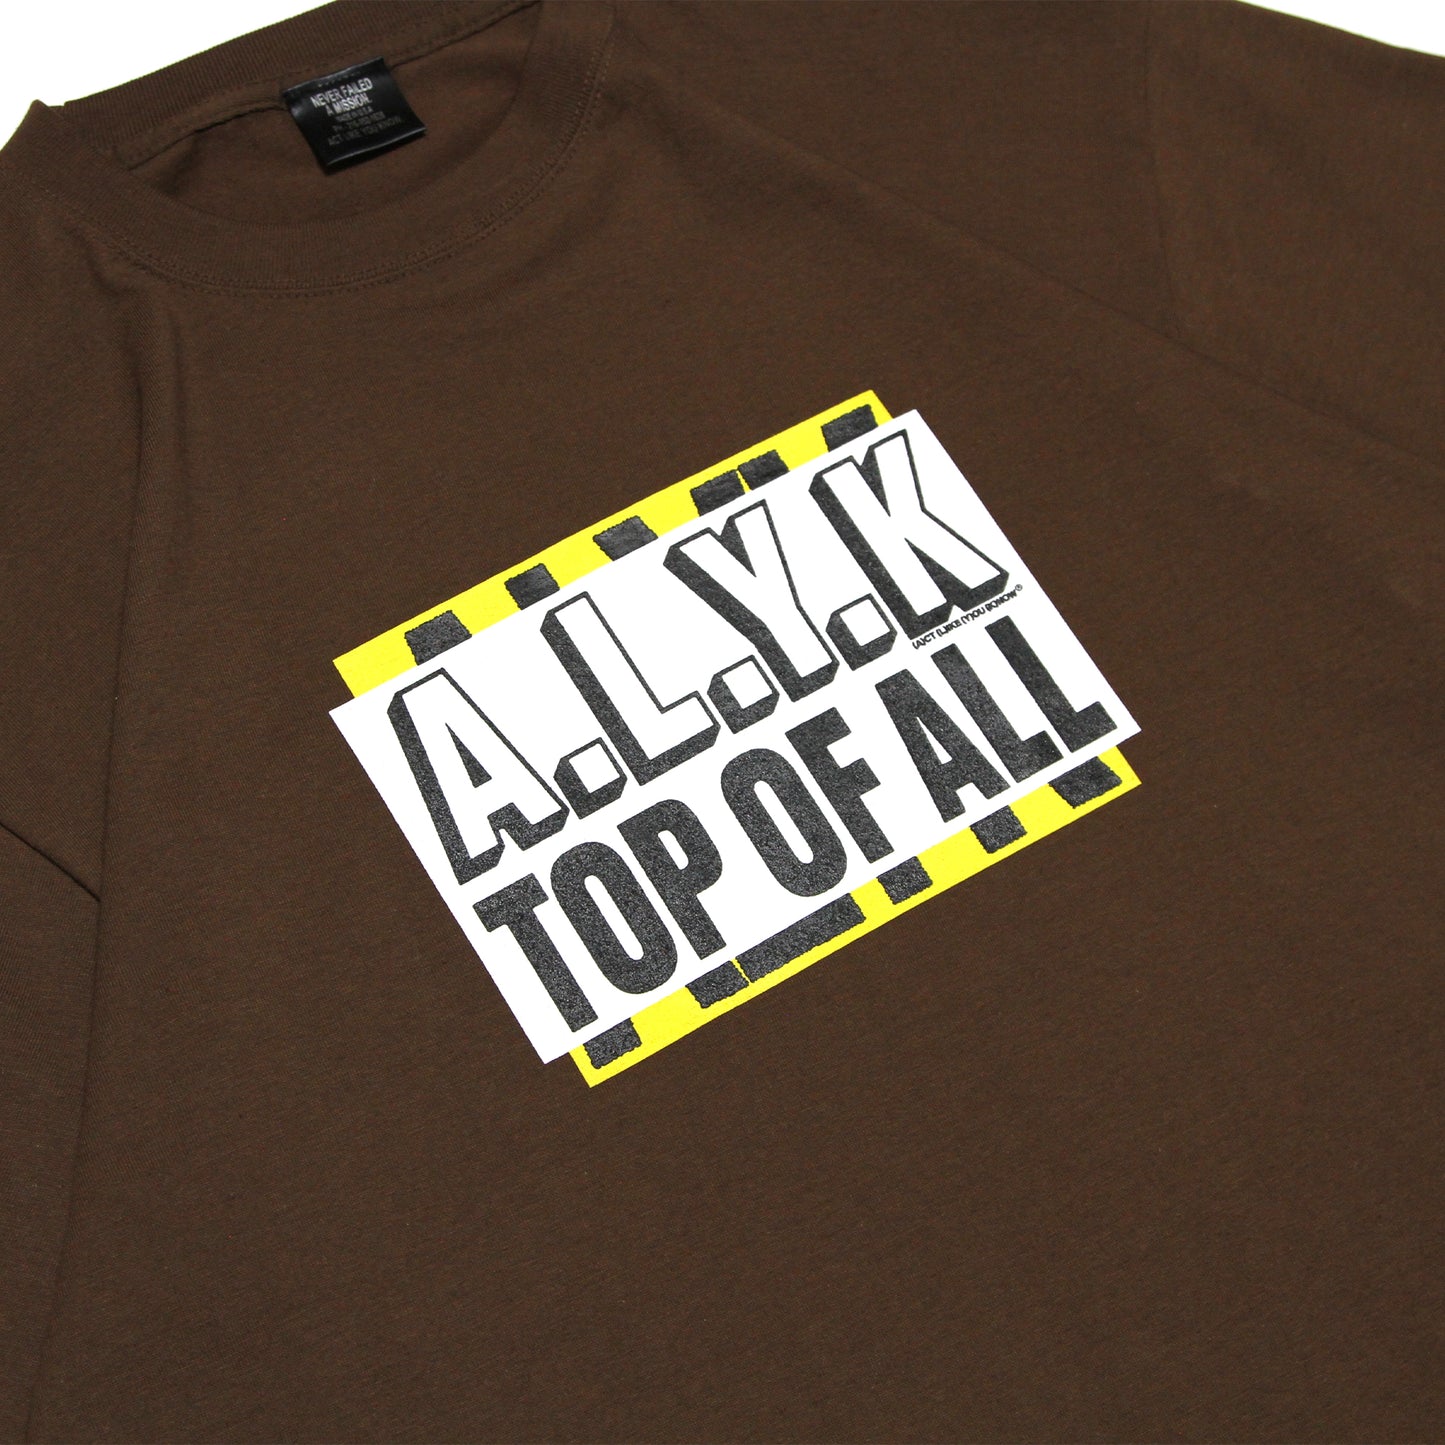 ALYK - Top Of All T-Shirt/Brass